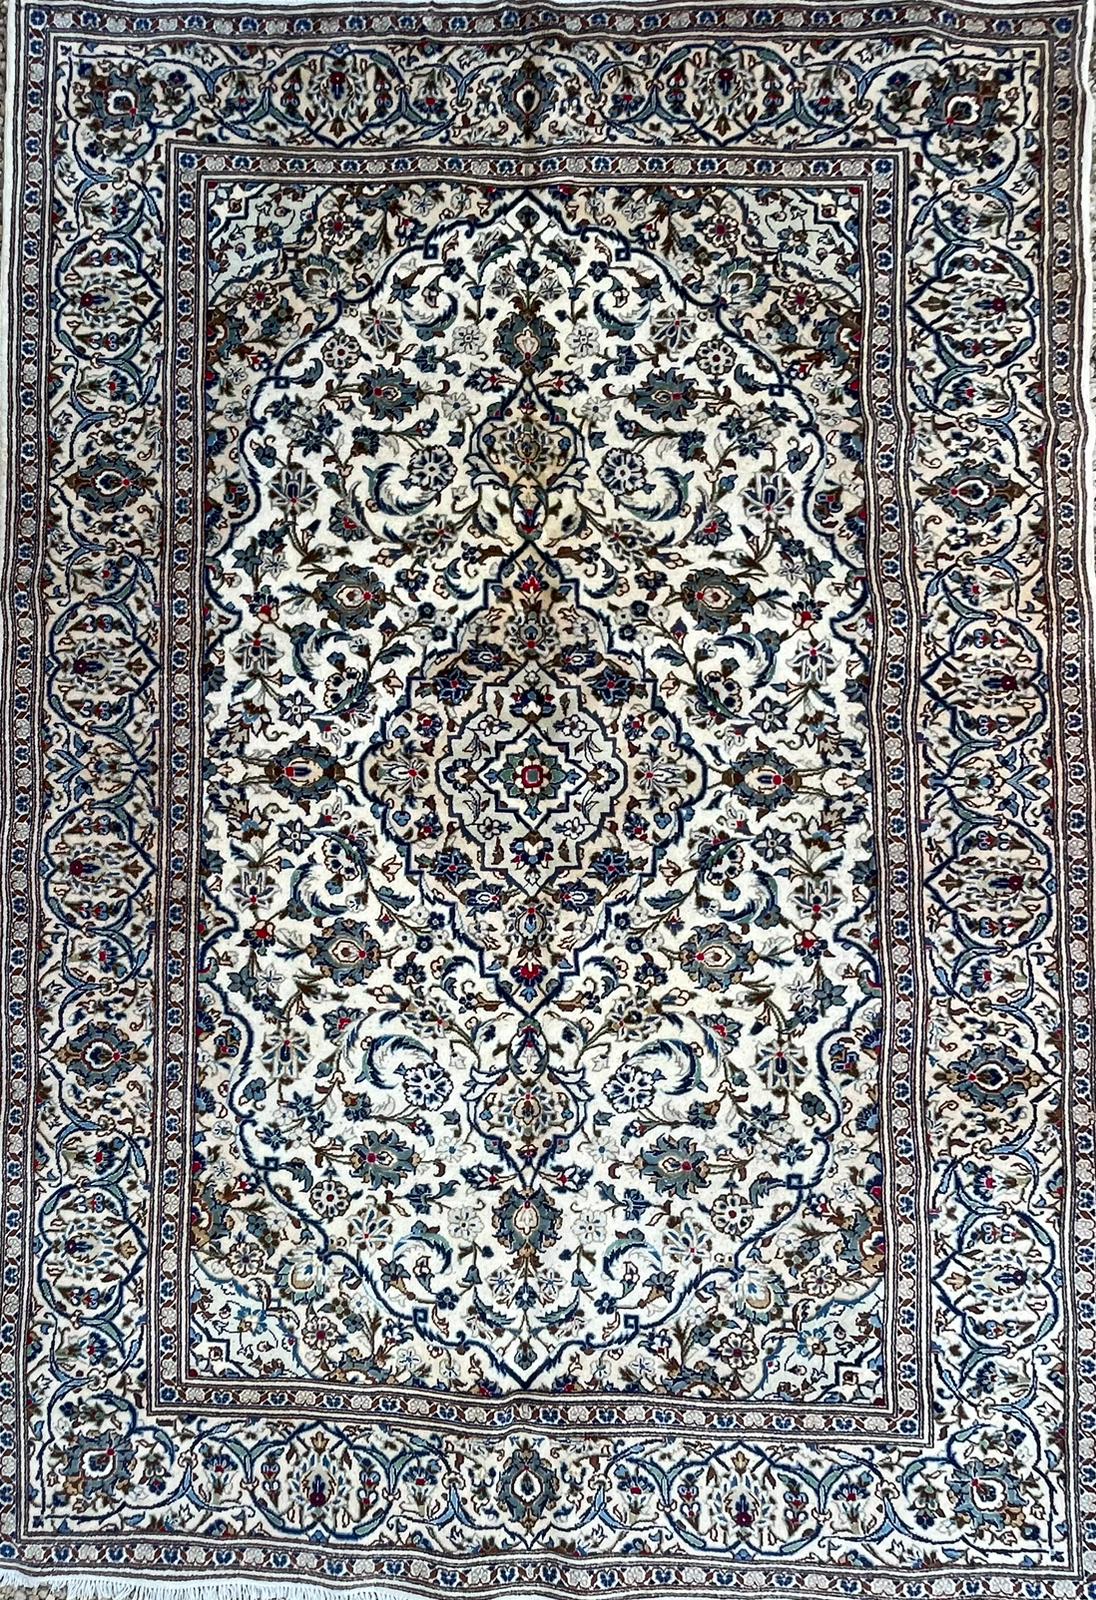 EARLY 20TH CENTURY CENTRAL PERSIAN KASHAN FLOOR CARPET RUG